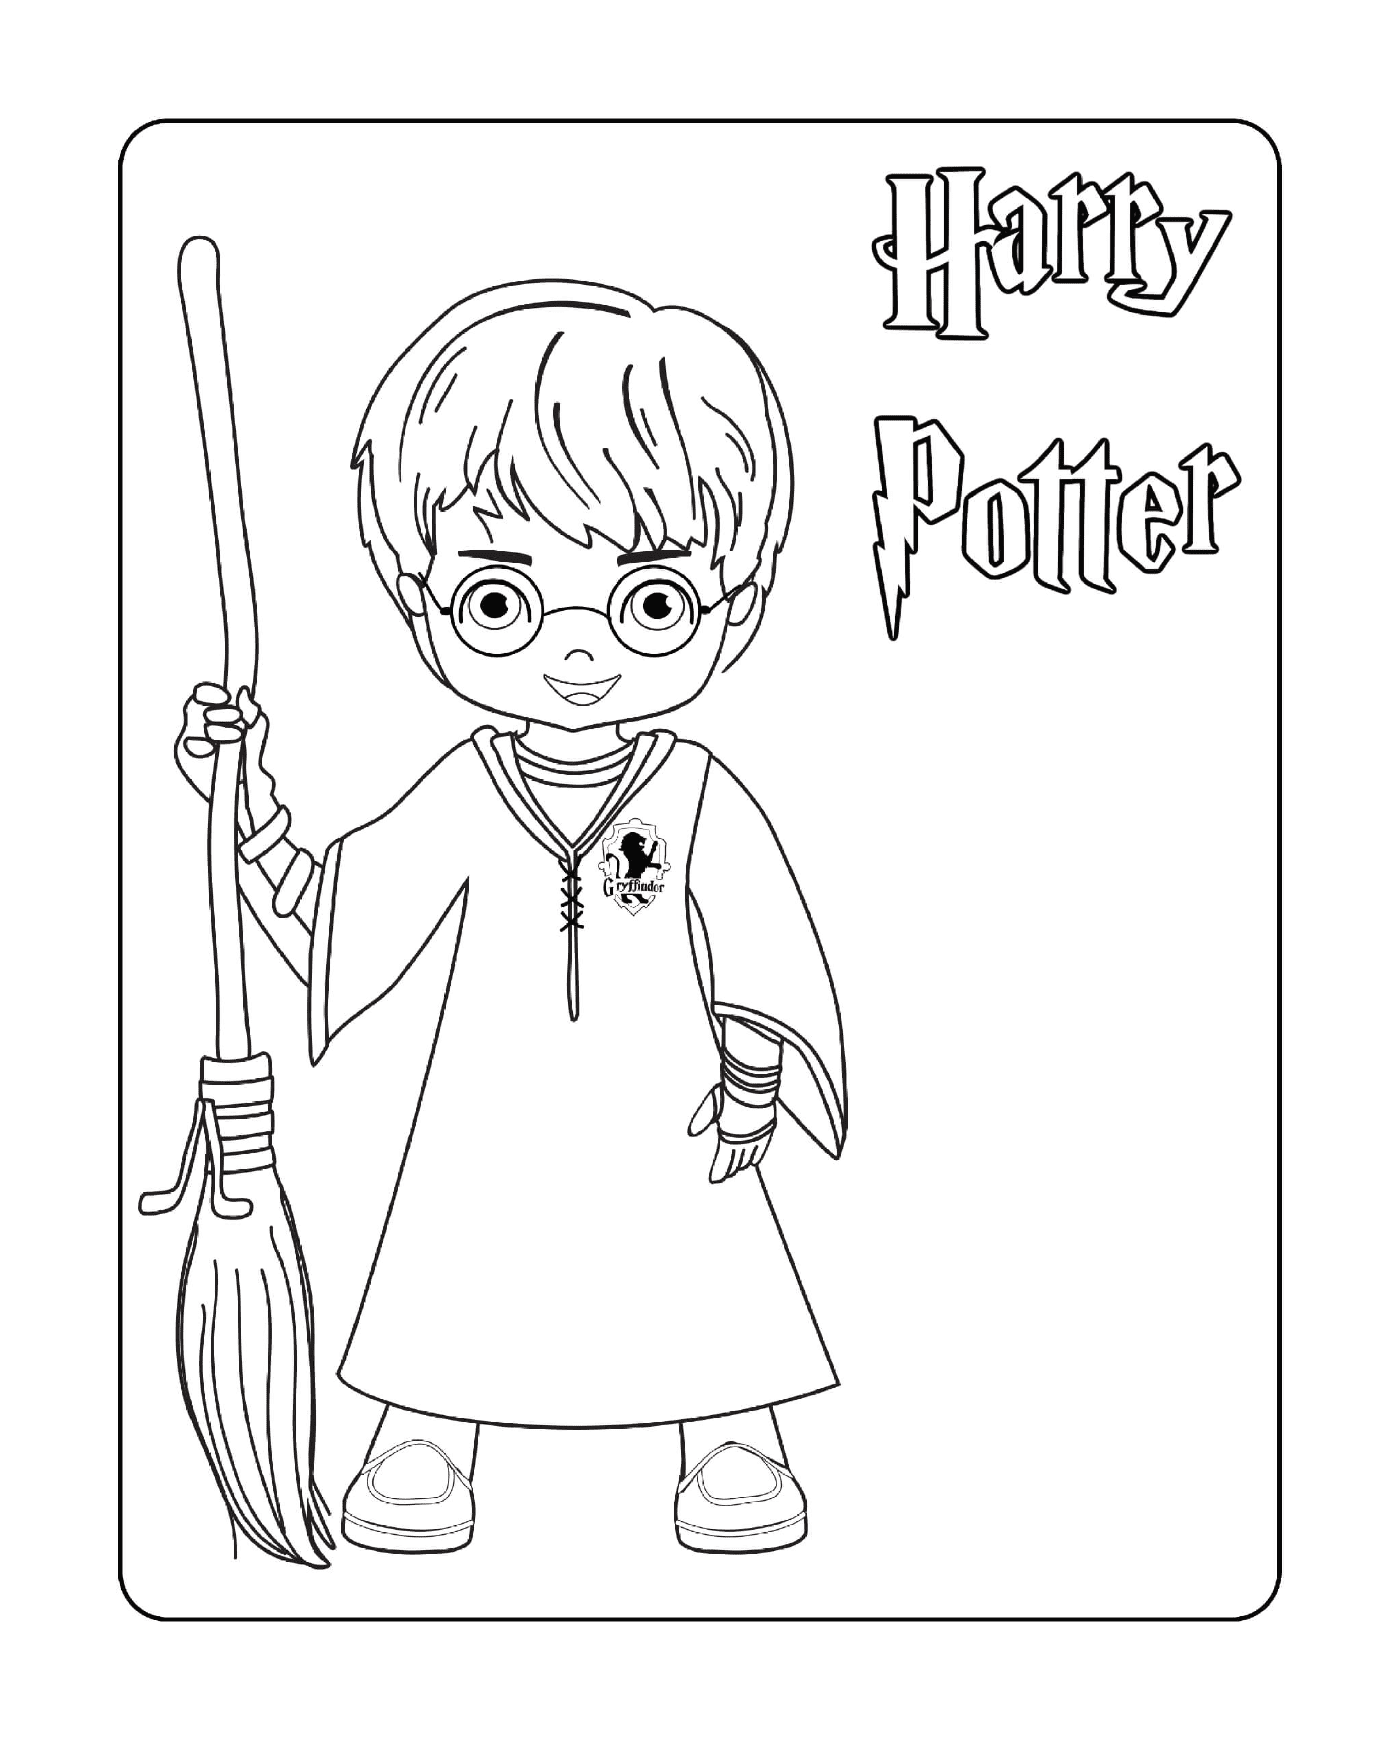  Boy holding a broom and wearing glasses 